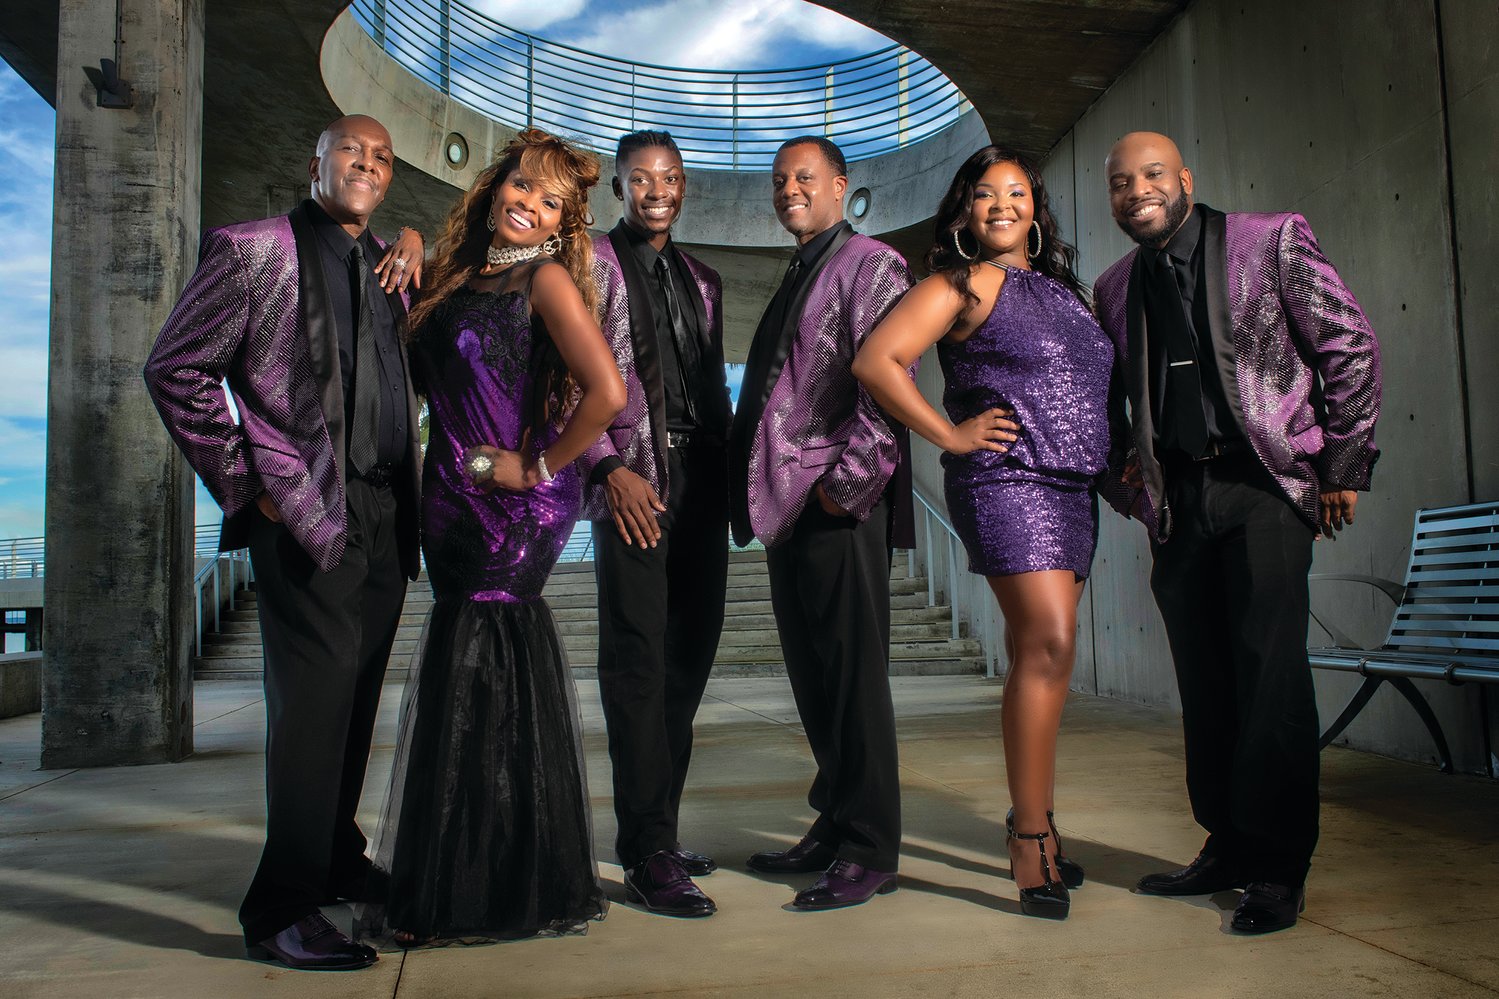 Get ready to relive the hits of Motown and beyond, as this exciting, high-energy group unleashes superior vocals and slick dance moves powered by pure soul at the Dolly Hand CAC on Thursday, March 16 at 7 p.m.